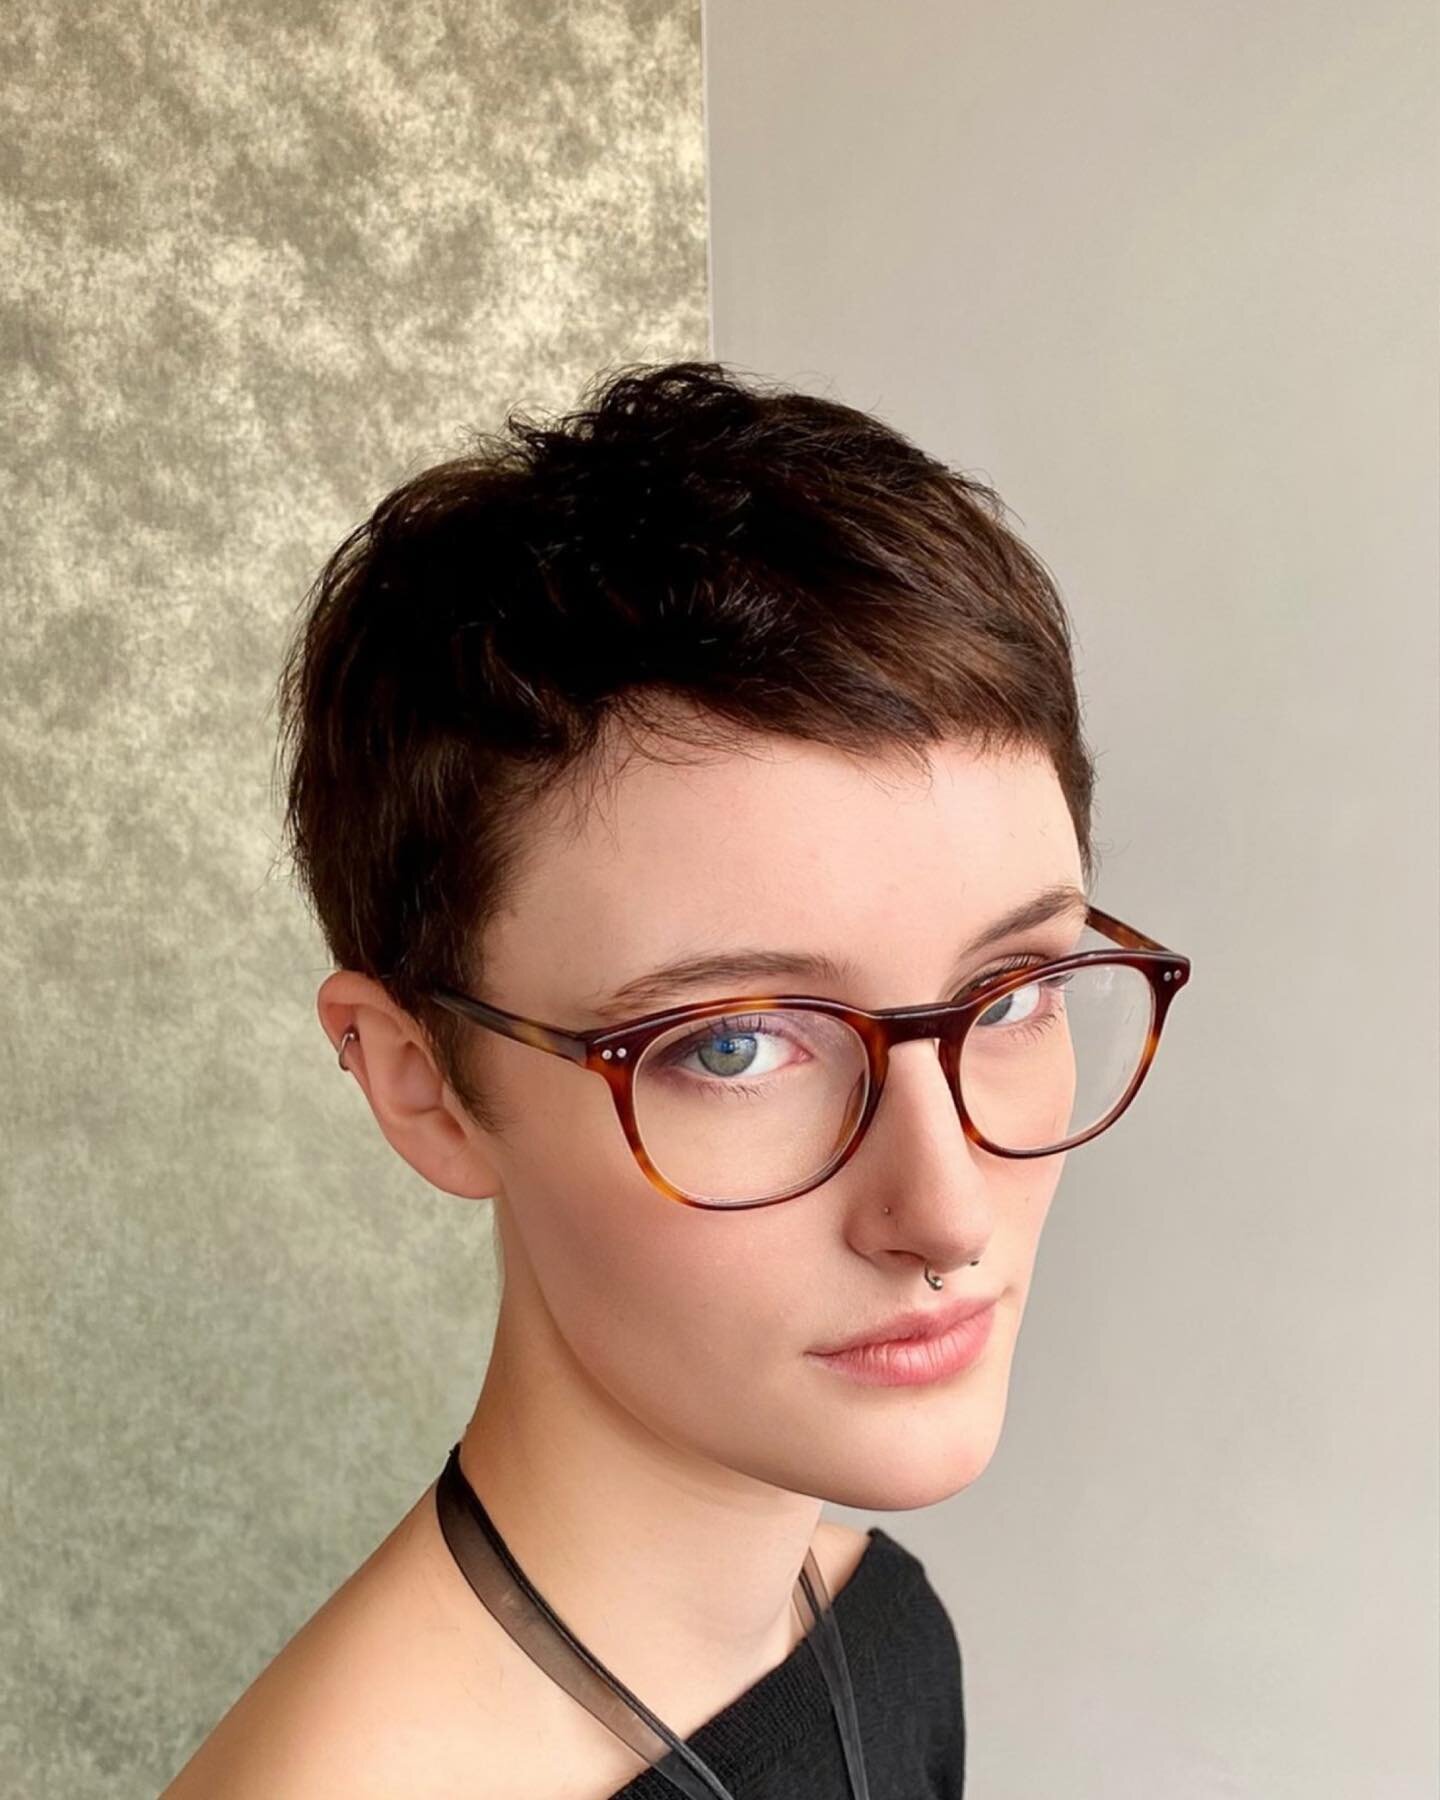 Our beautiful client Rosa owning the pixie cut !!!👌🏼💇🏼&zwj;♀️❤️
Done by our fabulous @danelleradel 

@lorealpro 
@ghdhair 
@redken 

#shorthair #pixie #pixiecut #hairgoals #haircut #hairtransformation #hairoftheday #hairofinstagram #instahair #ha